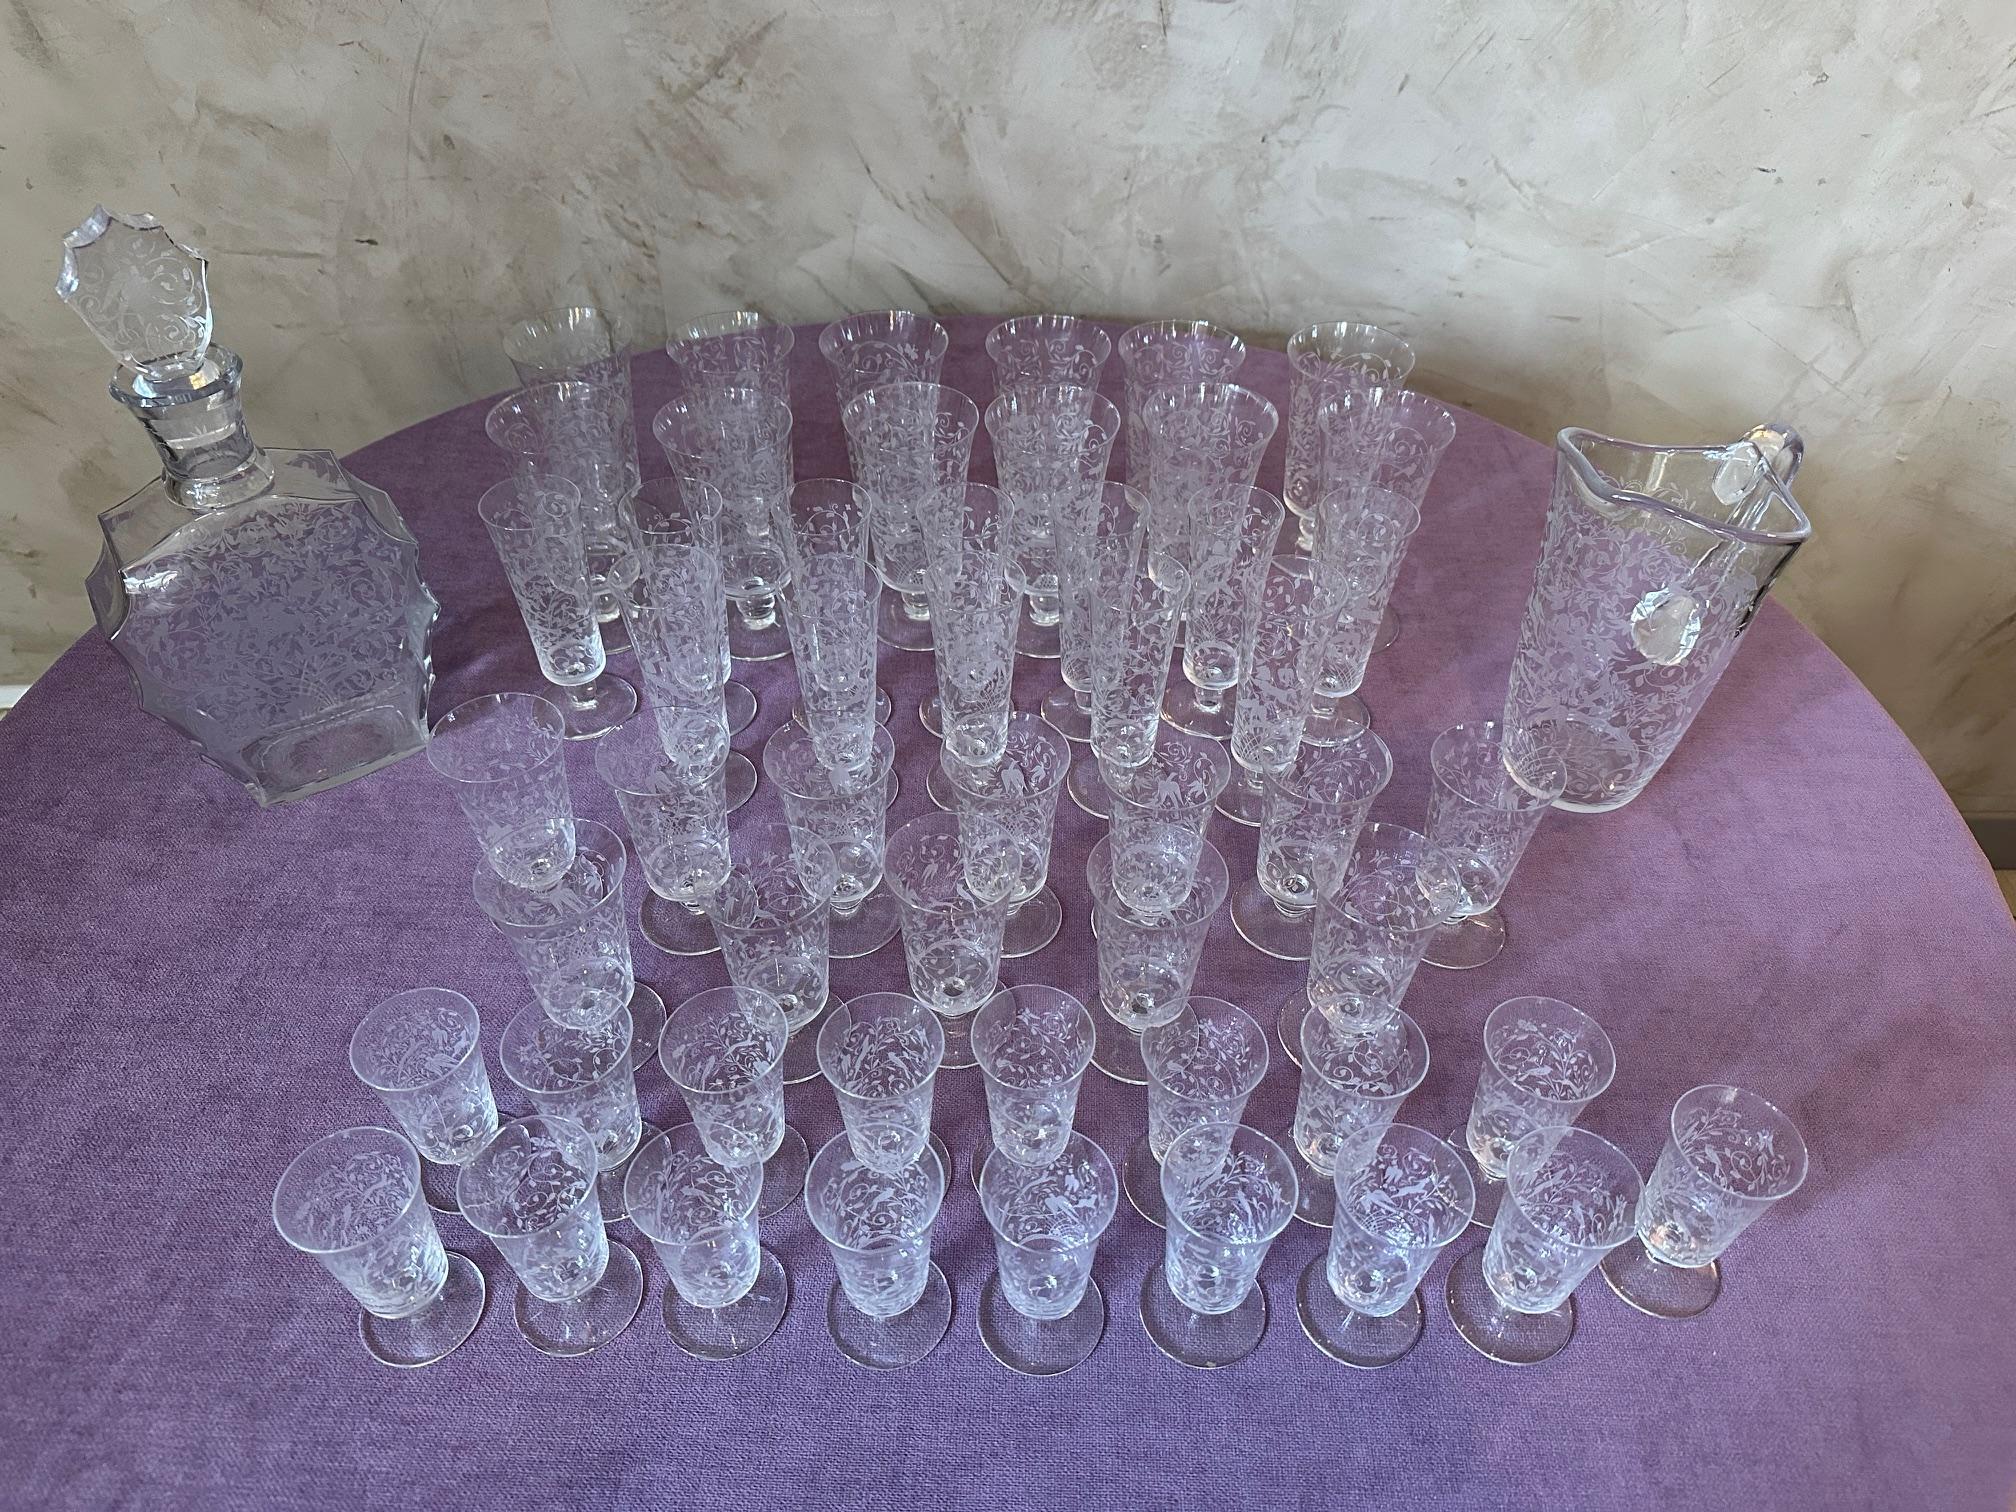 20th century French Set of Crystal Baccarat Glasses, Pitcher and Decanter For Sale 7